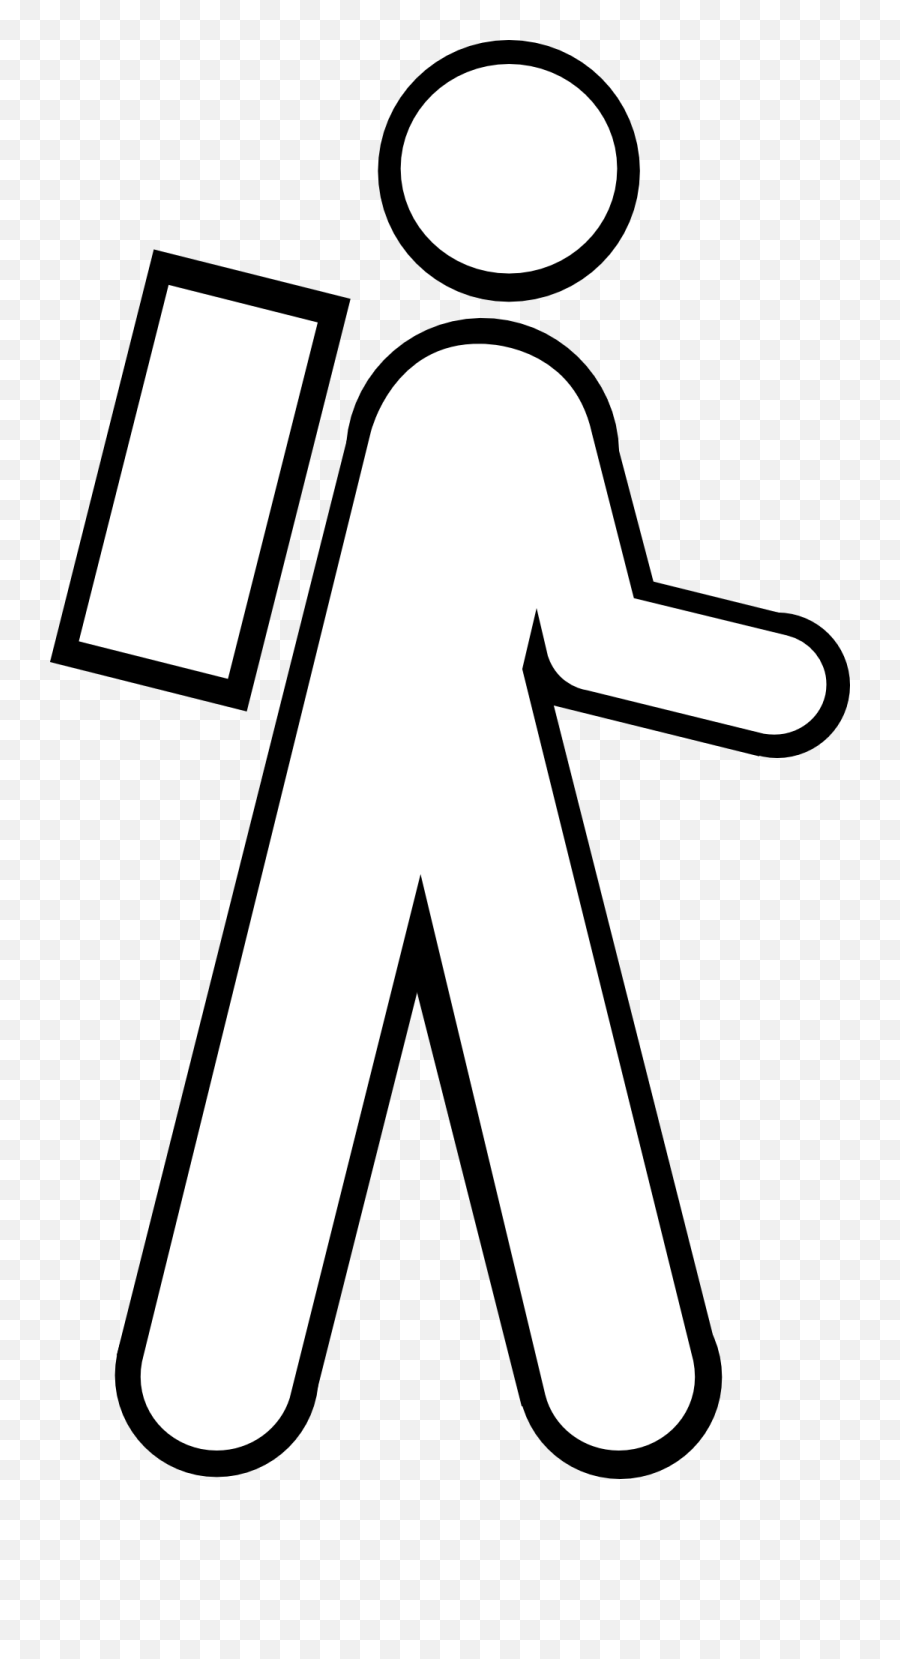 Hiking Walking Rucksack - Free Vector Graphic On Pixabay Walking Stick Man With Back Pack Png,Backpack Png